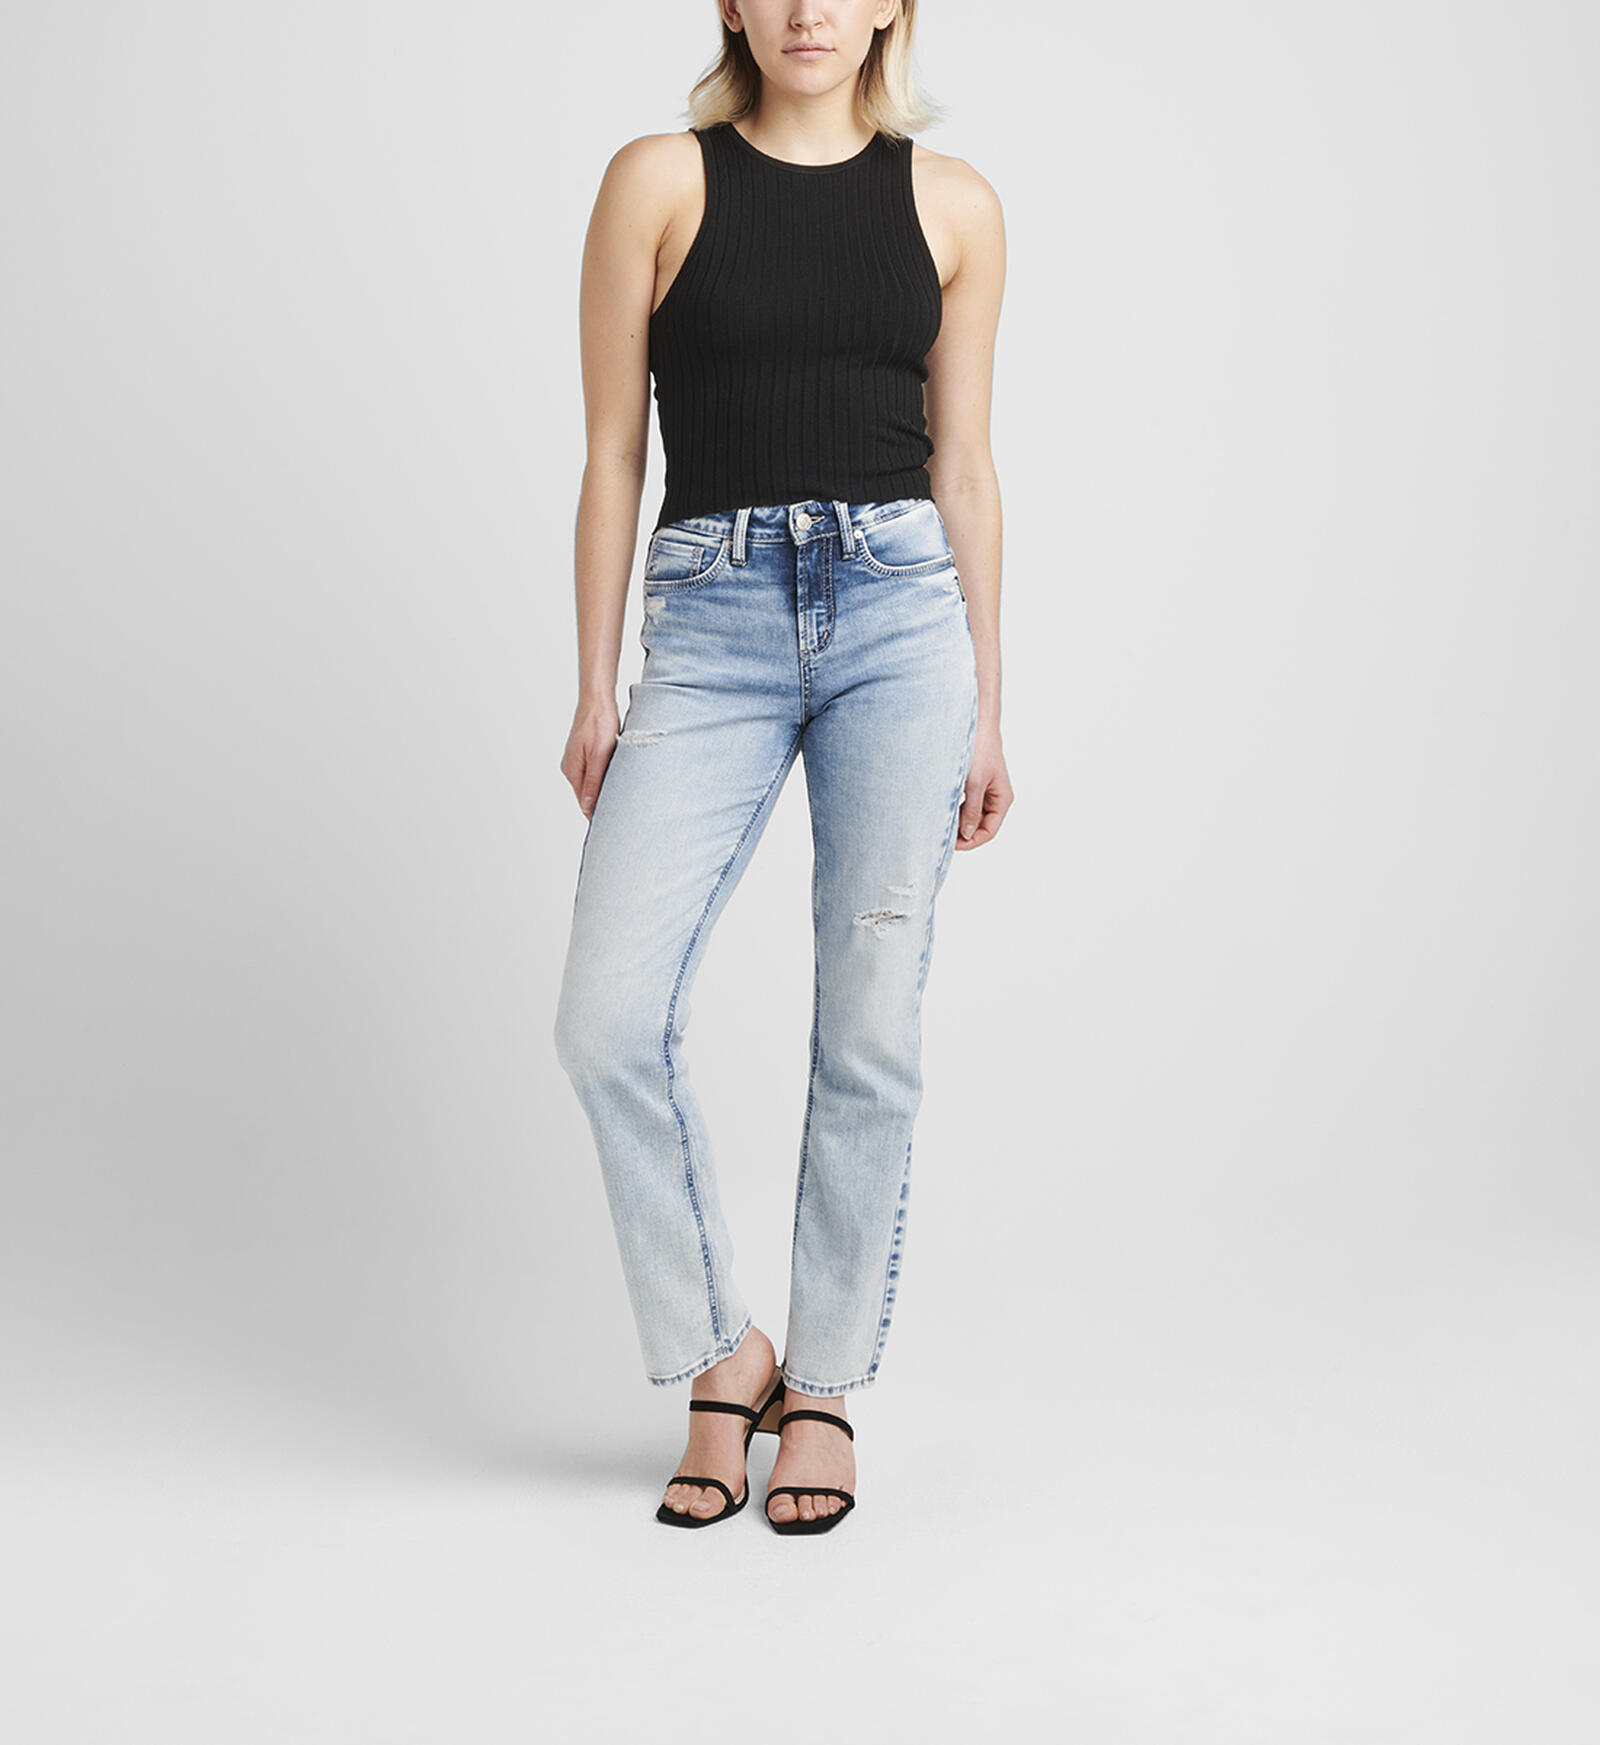 Buy Avery High Rise Straight Leg Jeans for CAD 98.00